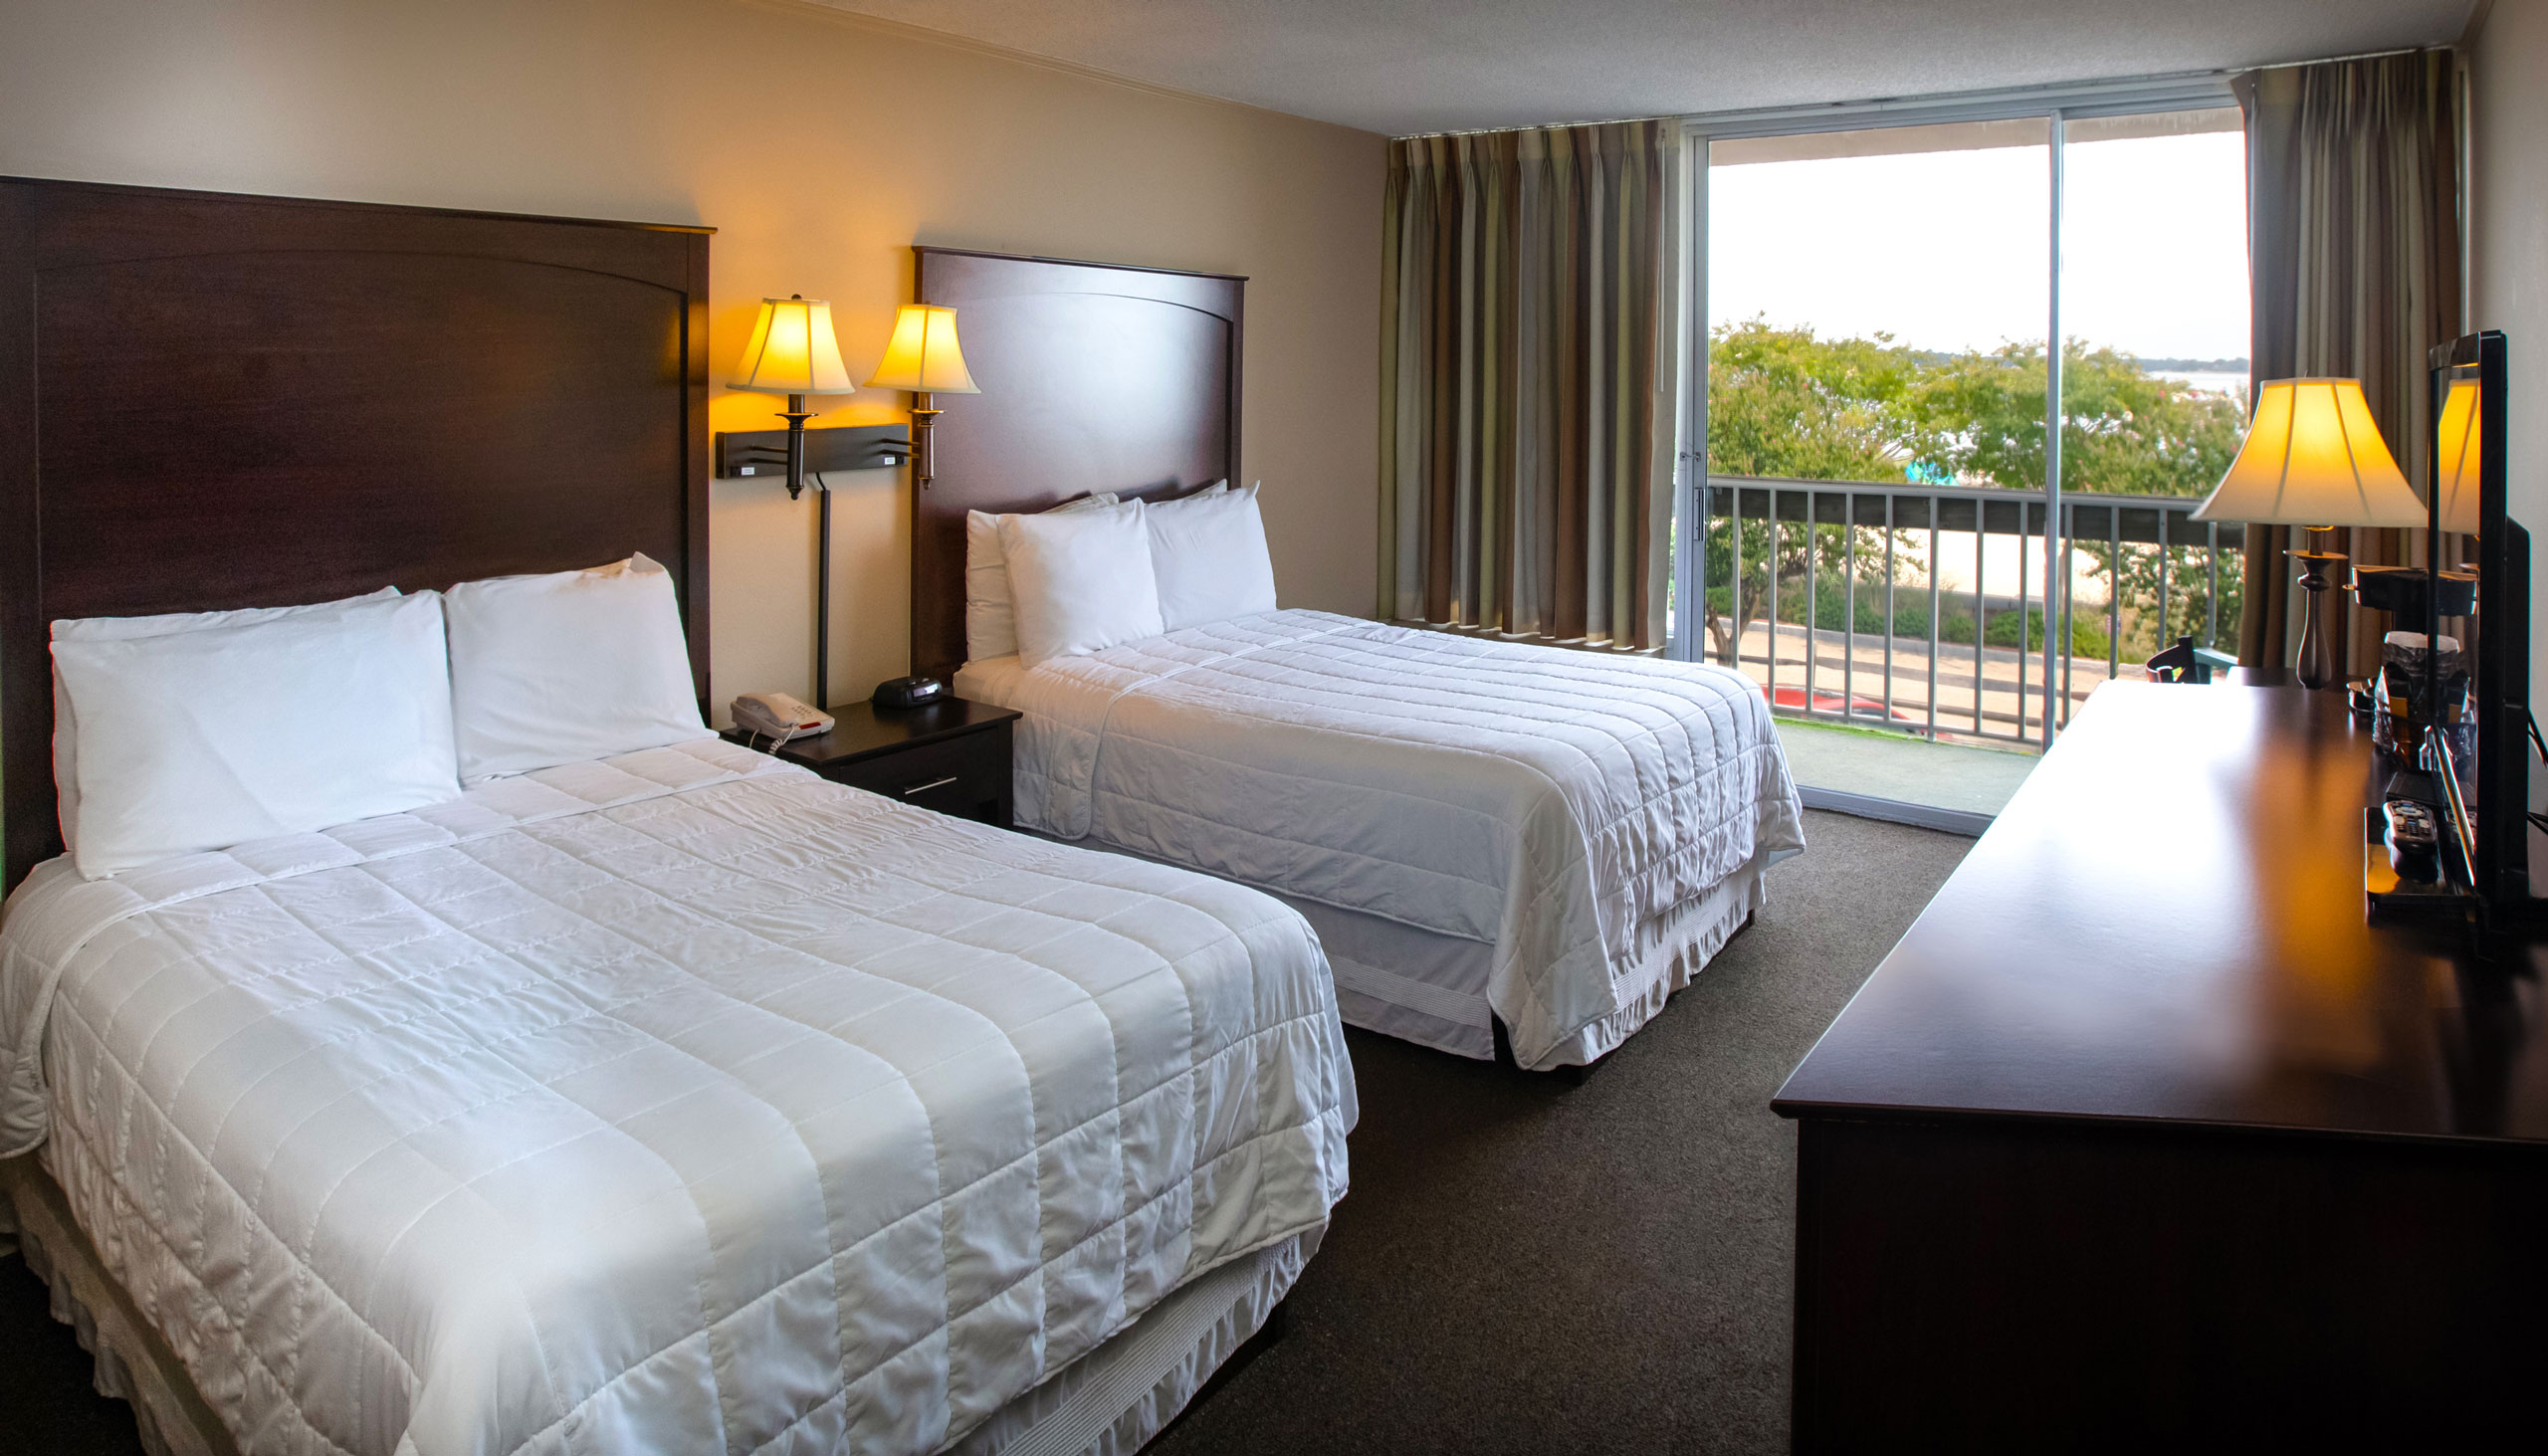 A spacious Yorktown hotel room with two full-sized beds, white linens, and a glass sliding door to a private balcony in Yorktown.